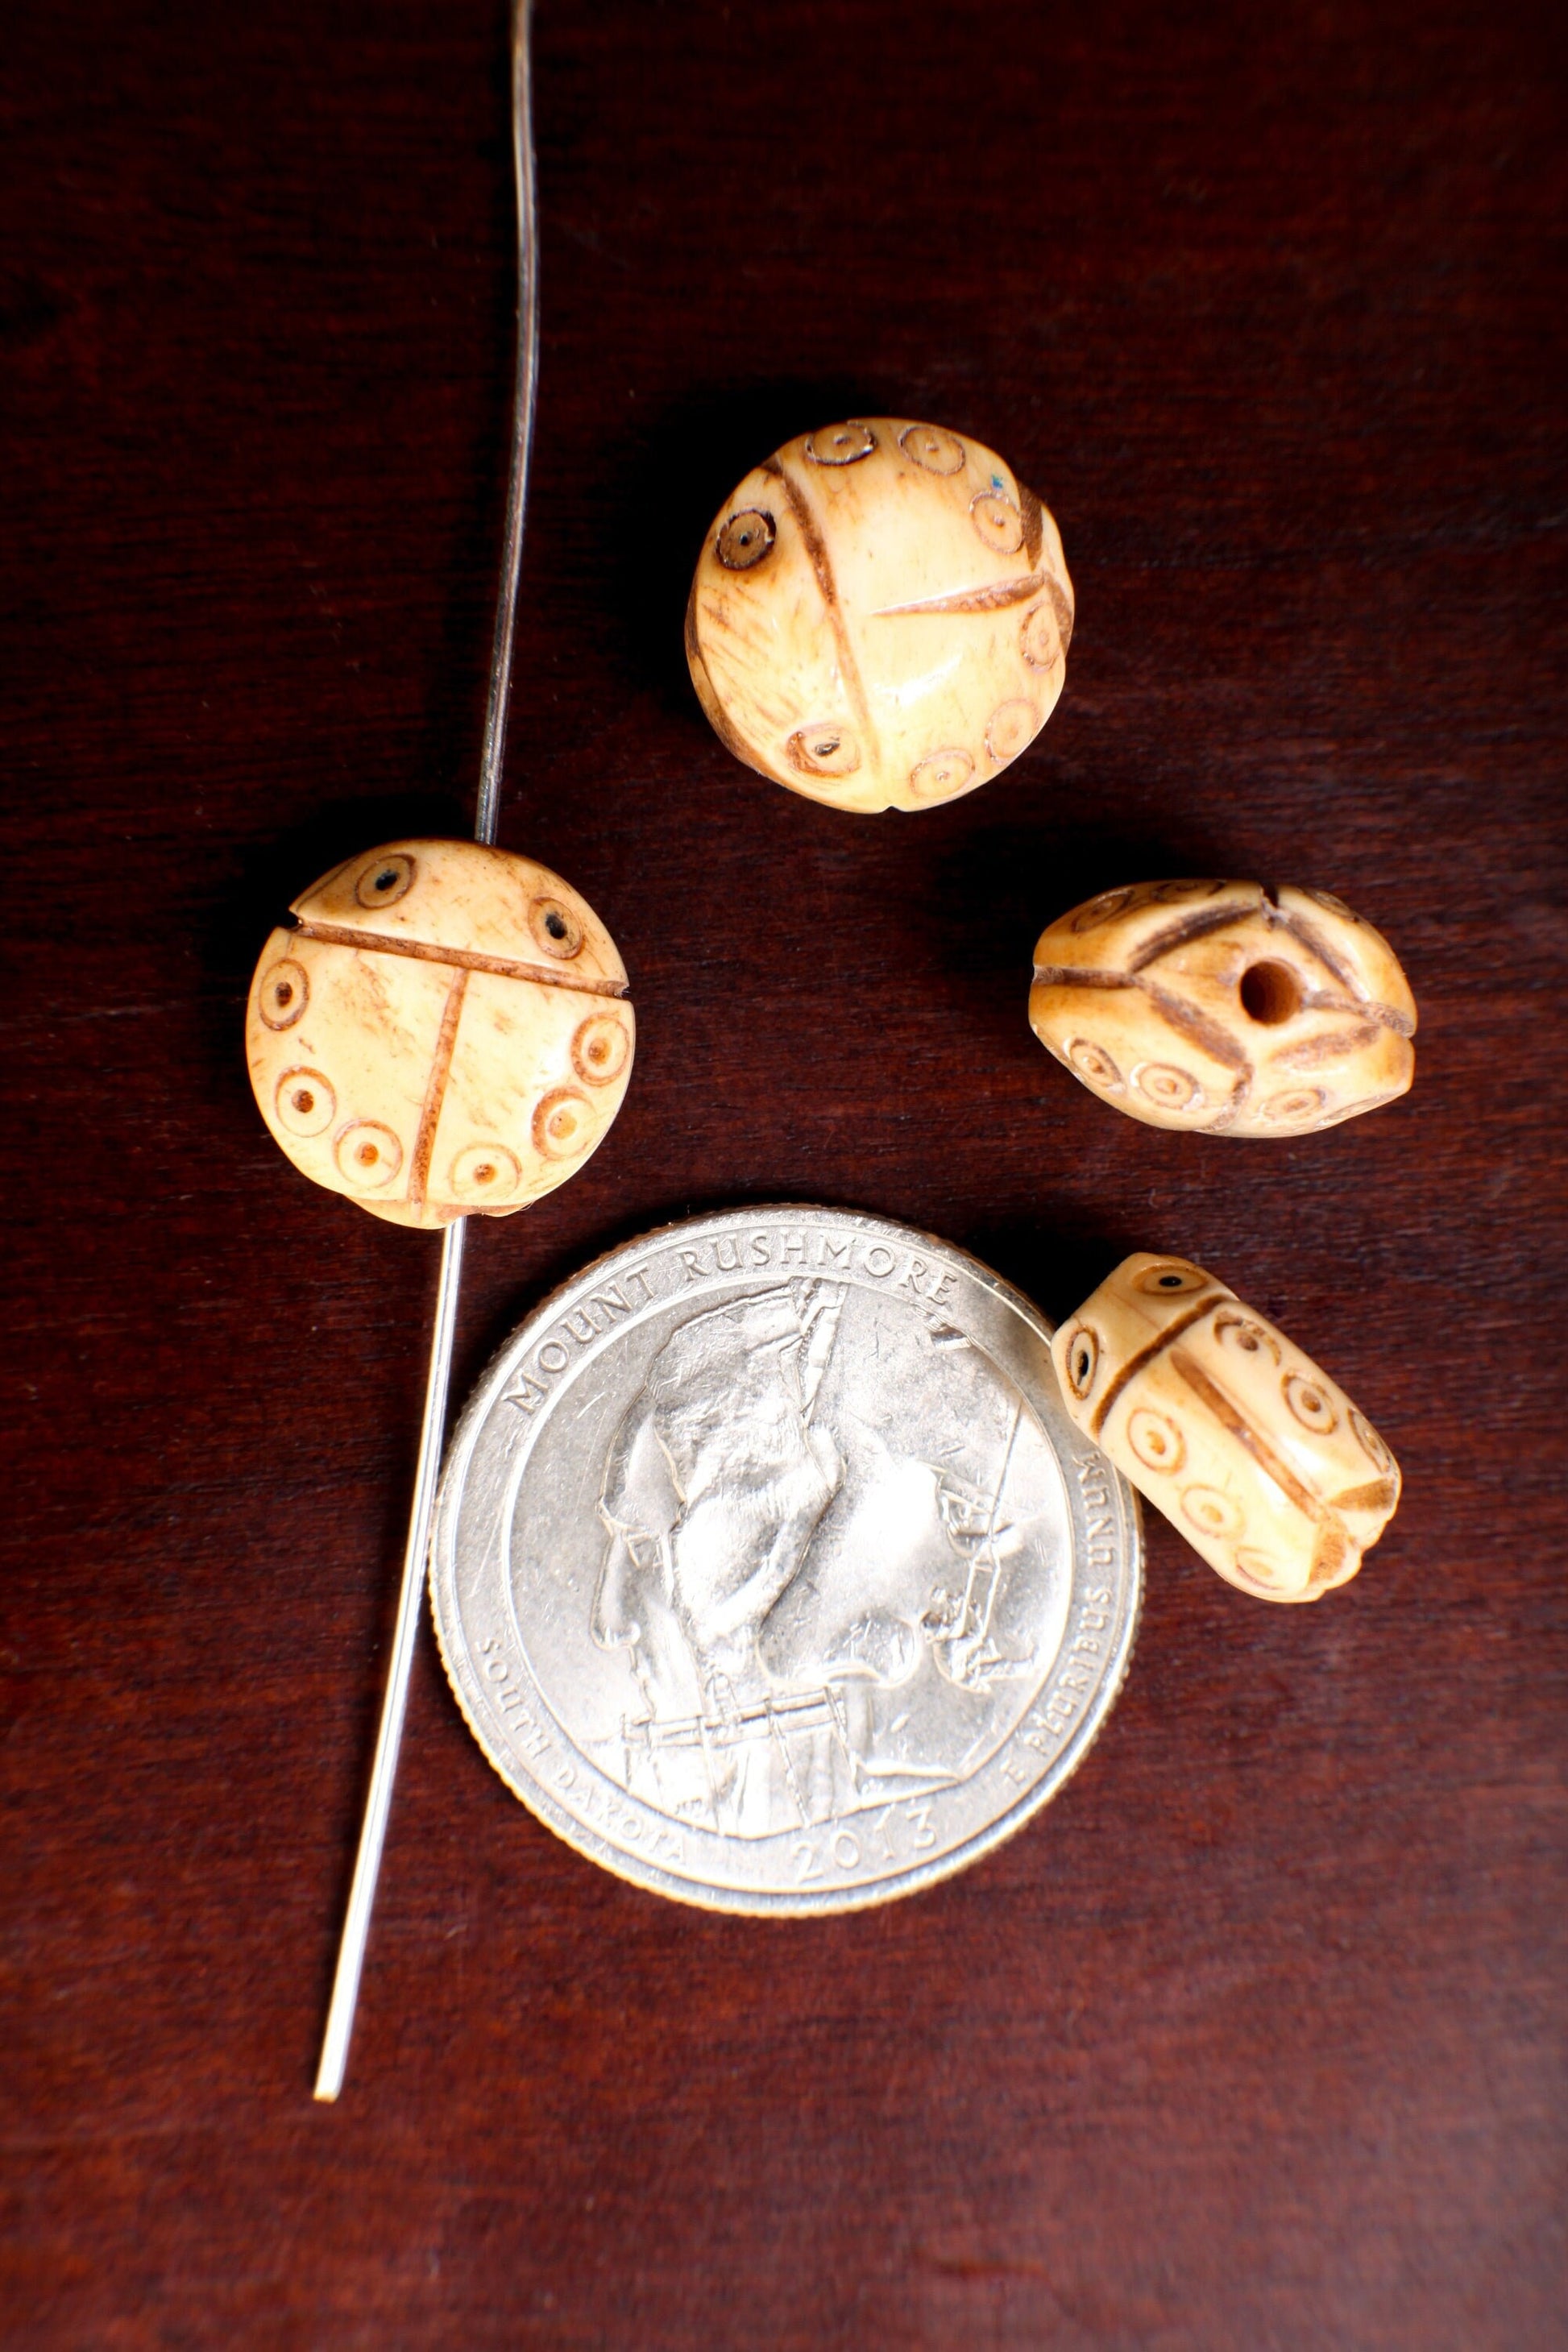 Carved Buffalo Bone Hand Craved Lady Bug, 12mm Top To Bottom Drilled Polished Double Sided Puffed Handcrafted Bead Charm, Art Deco